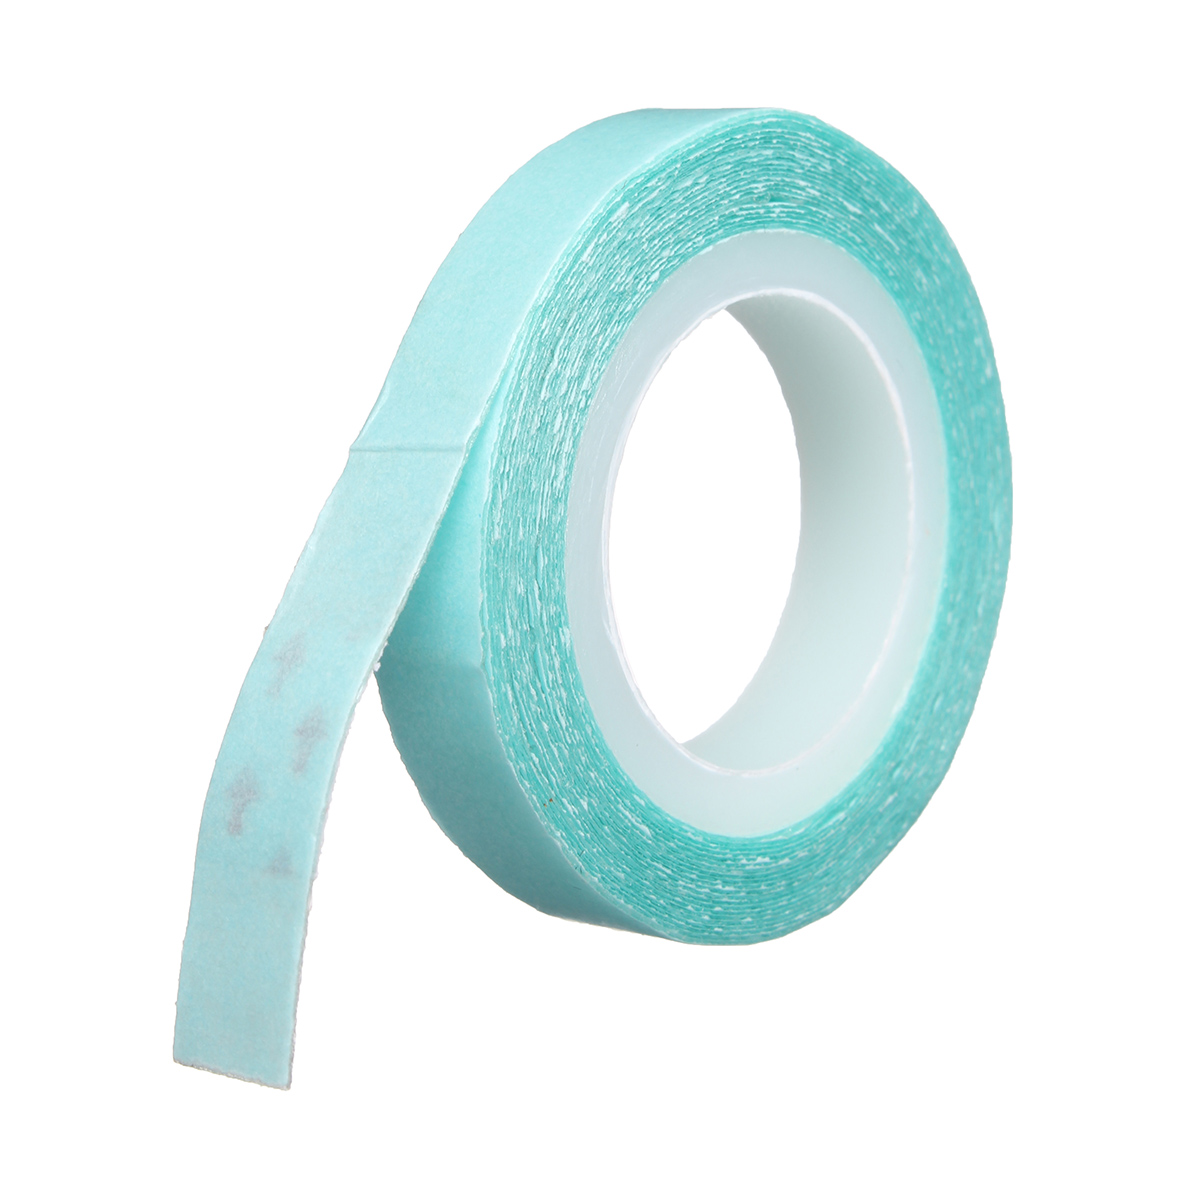 1-Roll-3yards-Hair-Extension-Tape-Extra-Strong-Double-Sided-Hair-Adhesive-for-Hair-Extensions-1257565